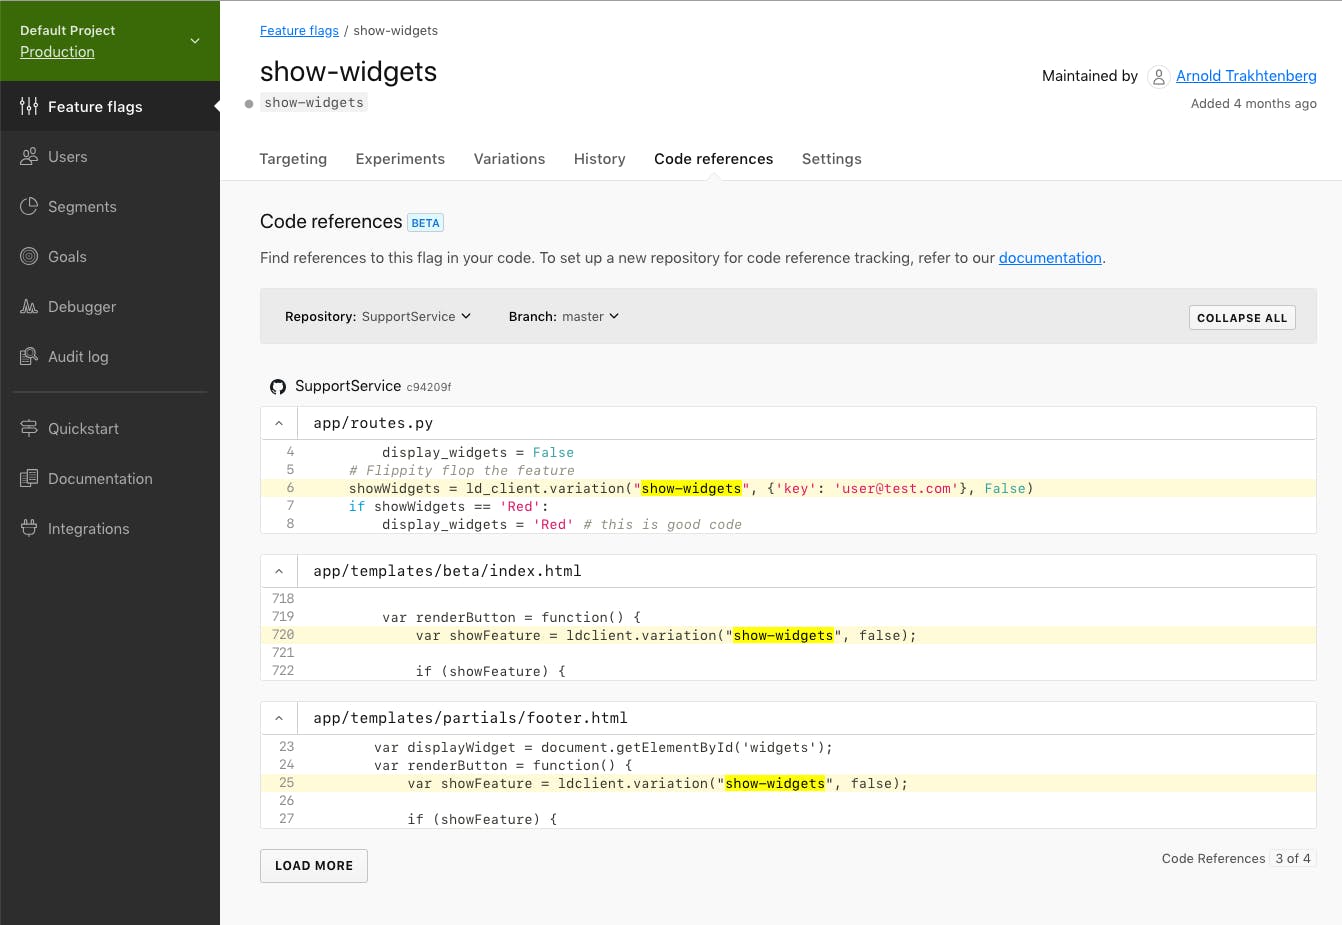 Launched: Code References featured image